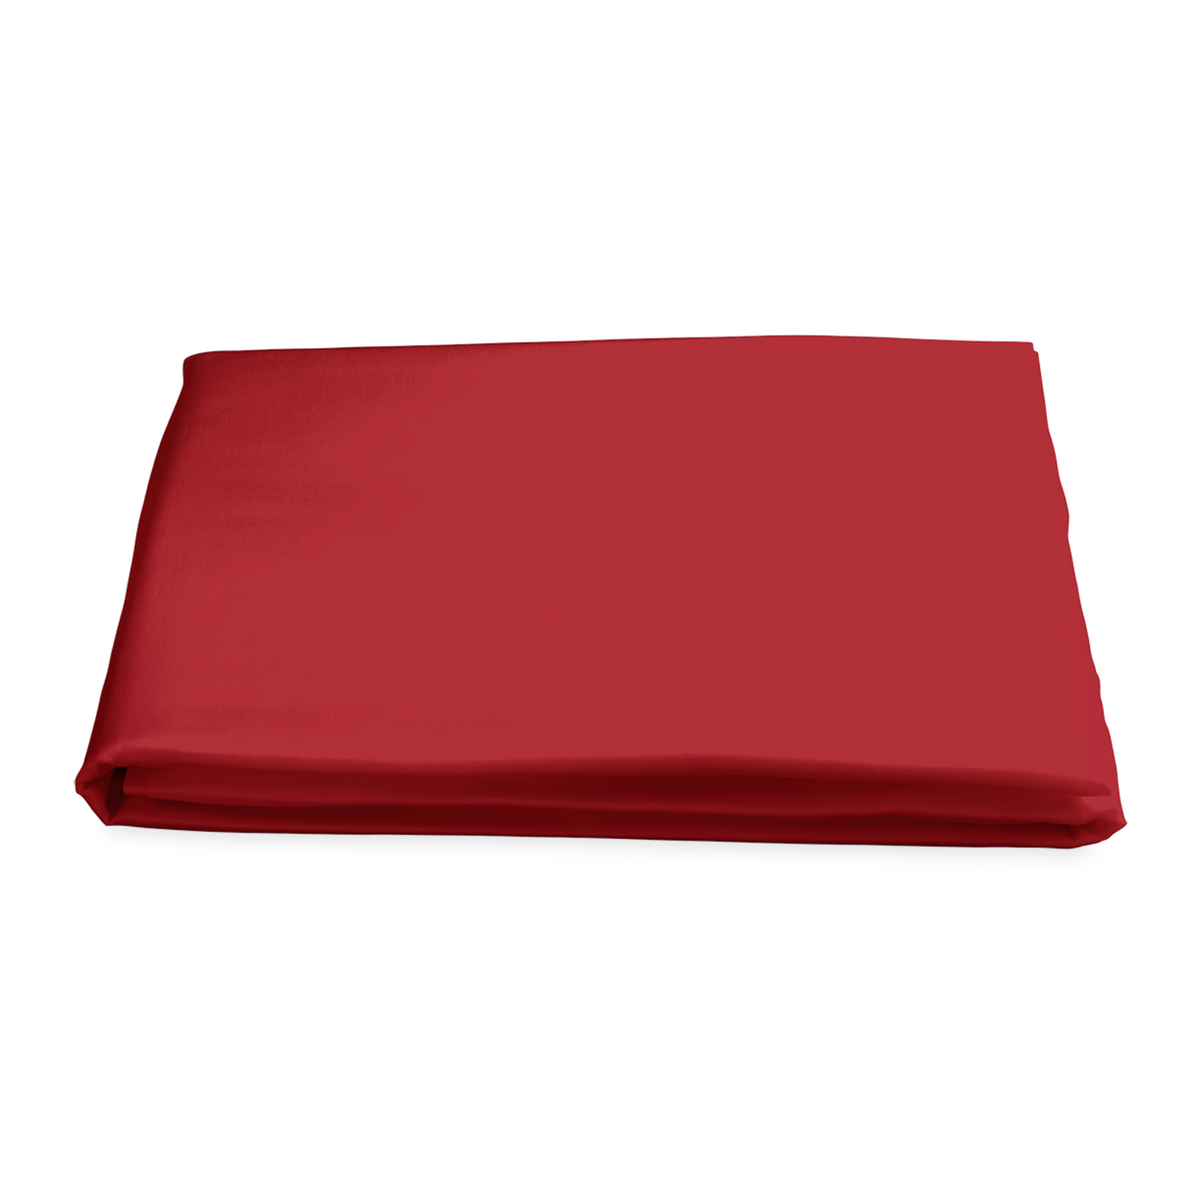 Fitted Sheet of Matouk Nocturne Bedding in Scarlet Color